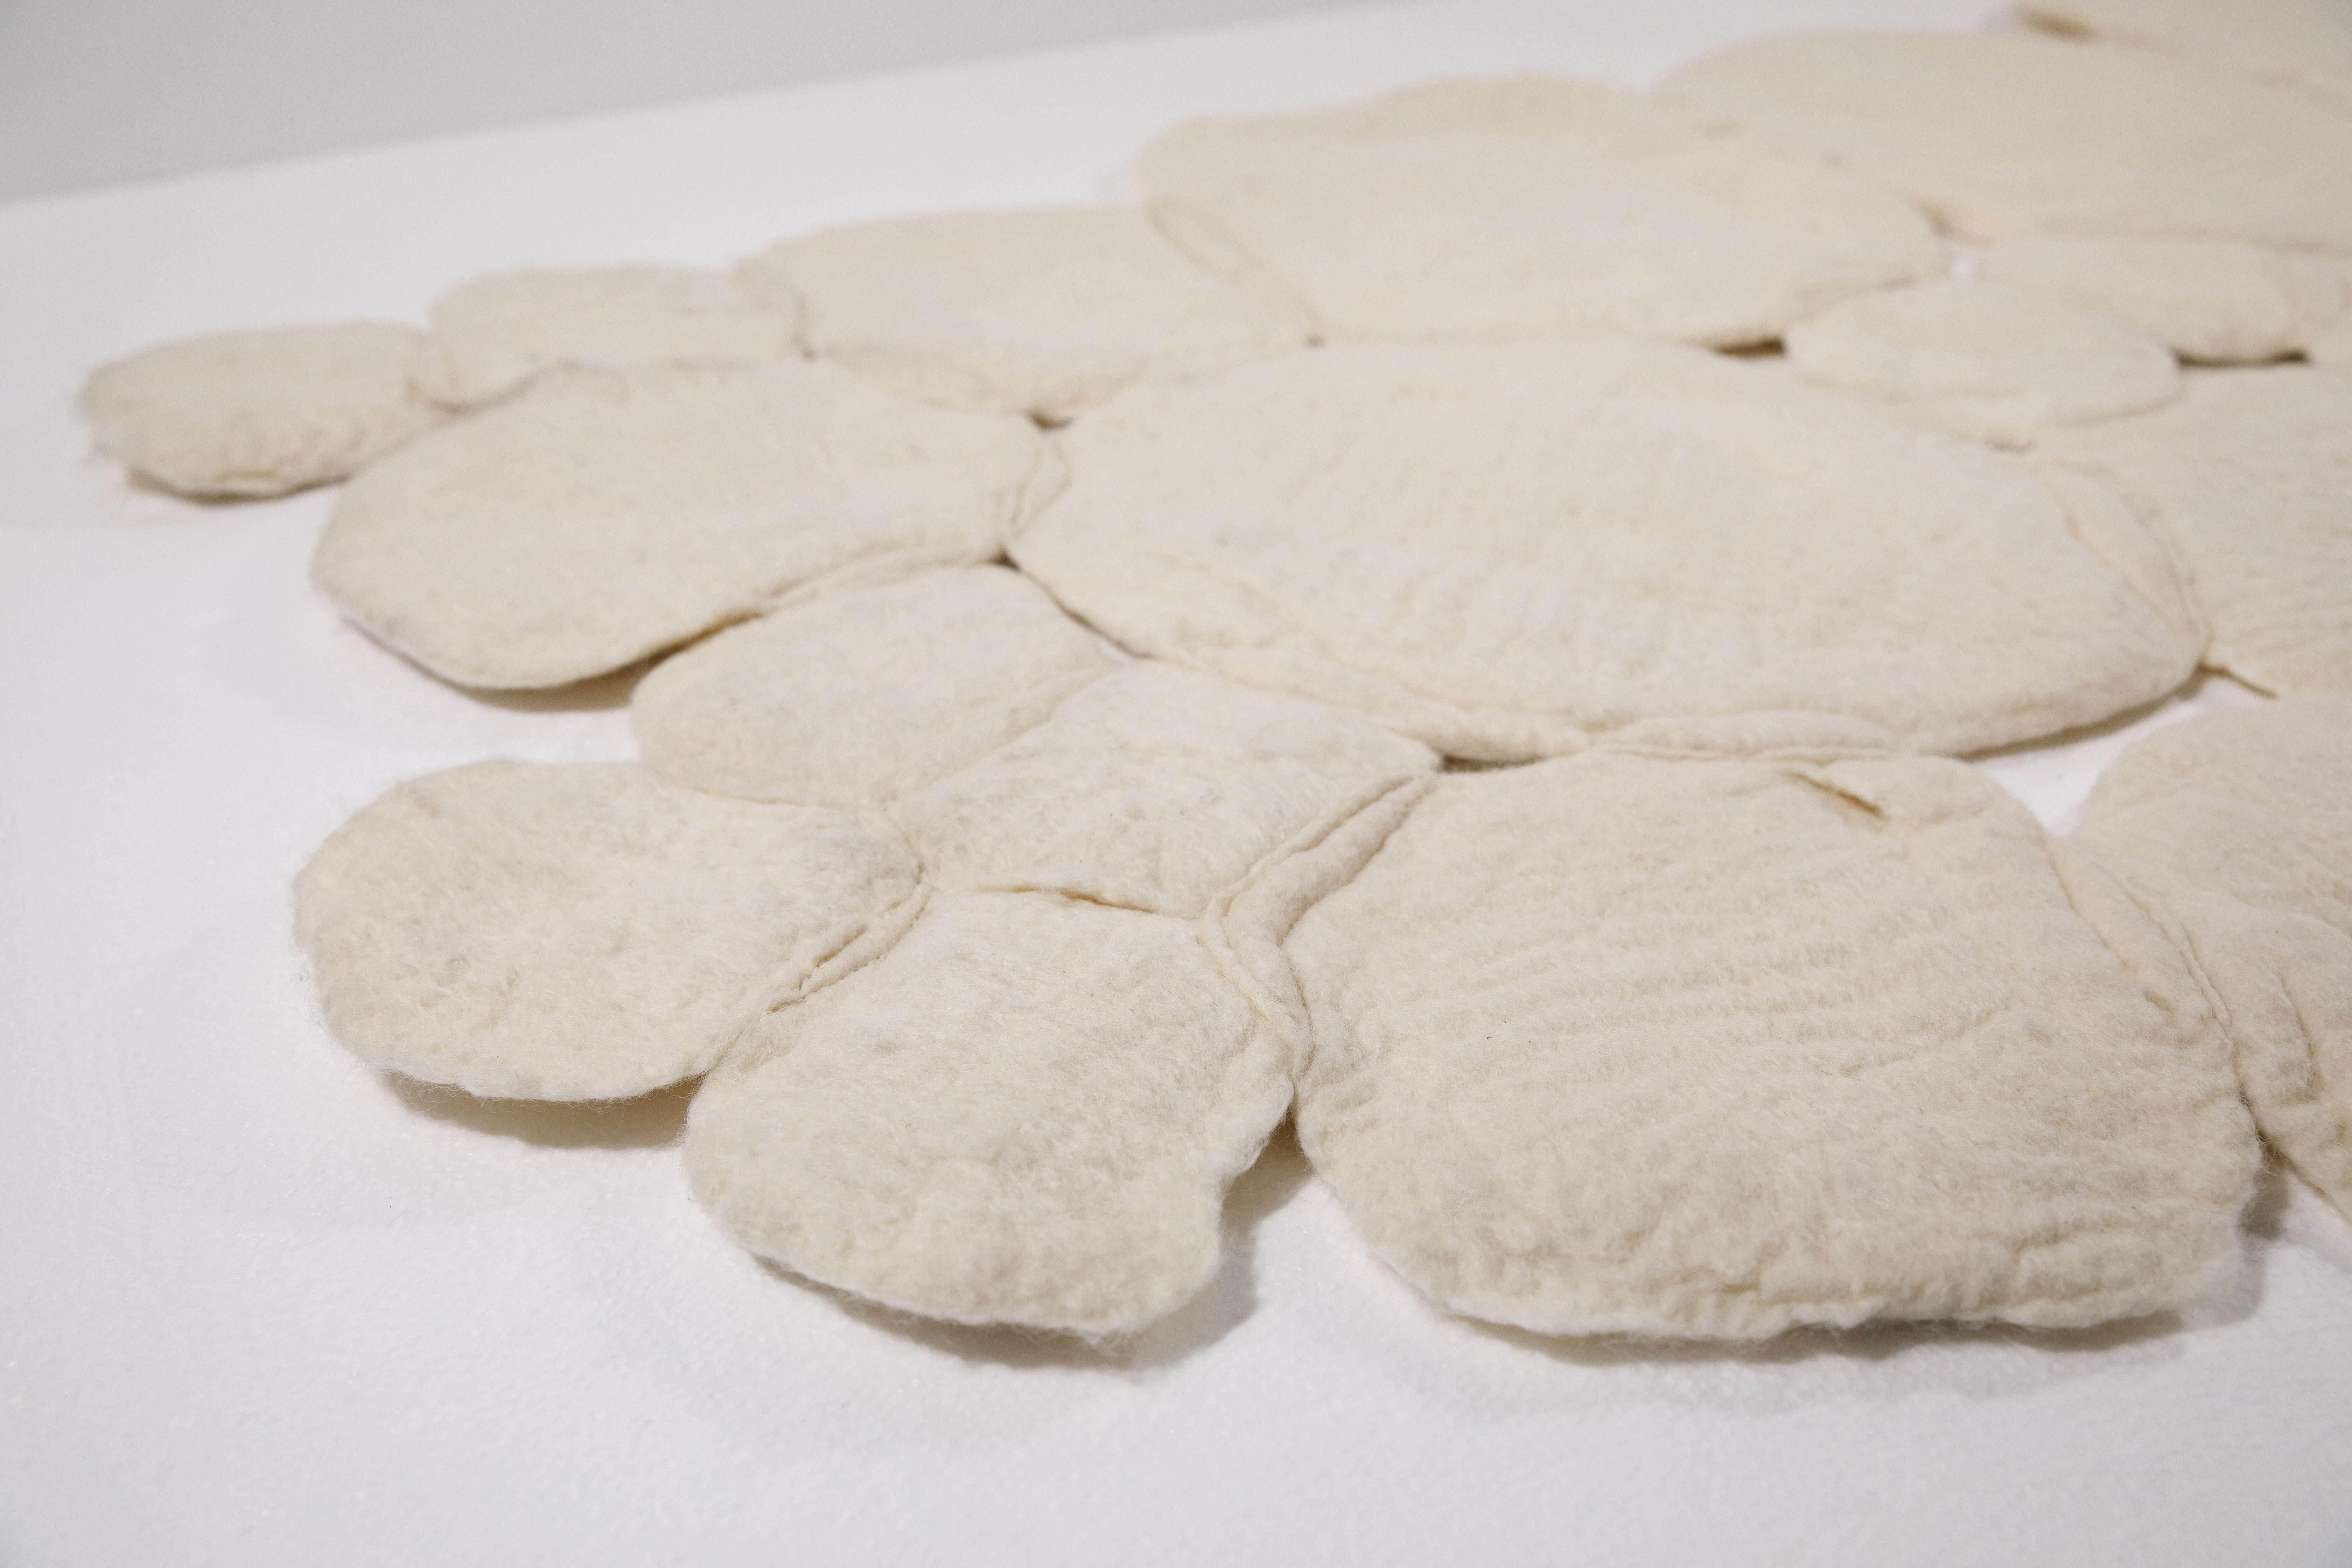 Contemporary “Nevoeiro” felted wool blanket or rug by Inês Schertel, Brazil, 2019

Ines Schertel's primary material is sheep's wool. As a practitioner of slow design, the artist takes a holistic approach to textile design, personally overseeing